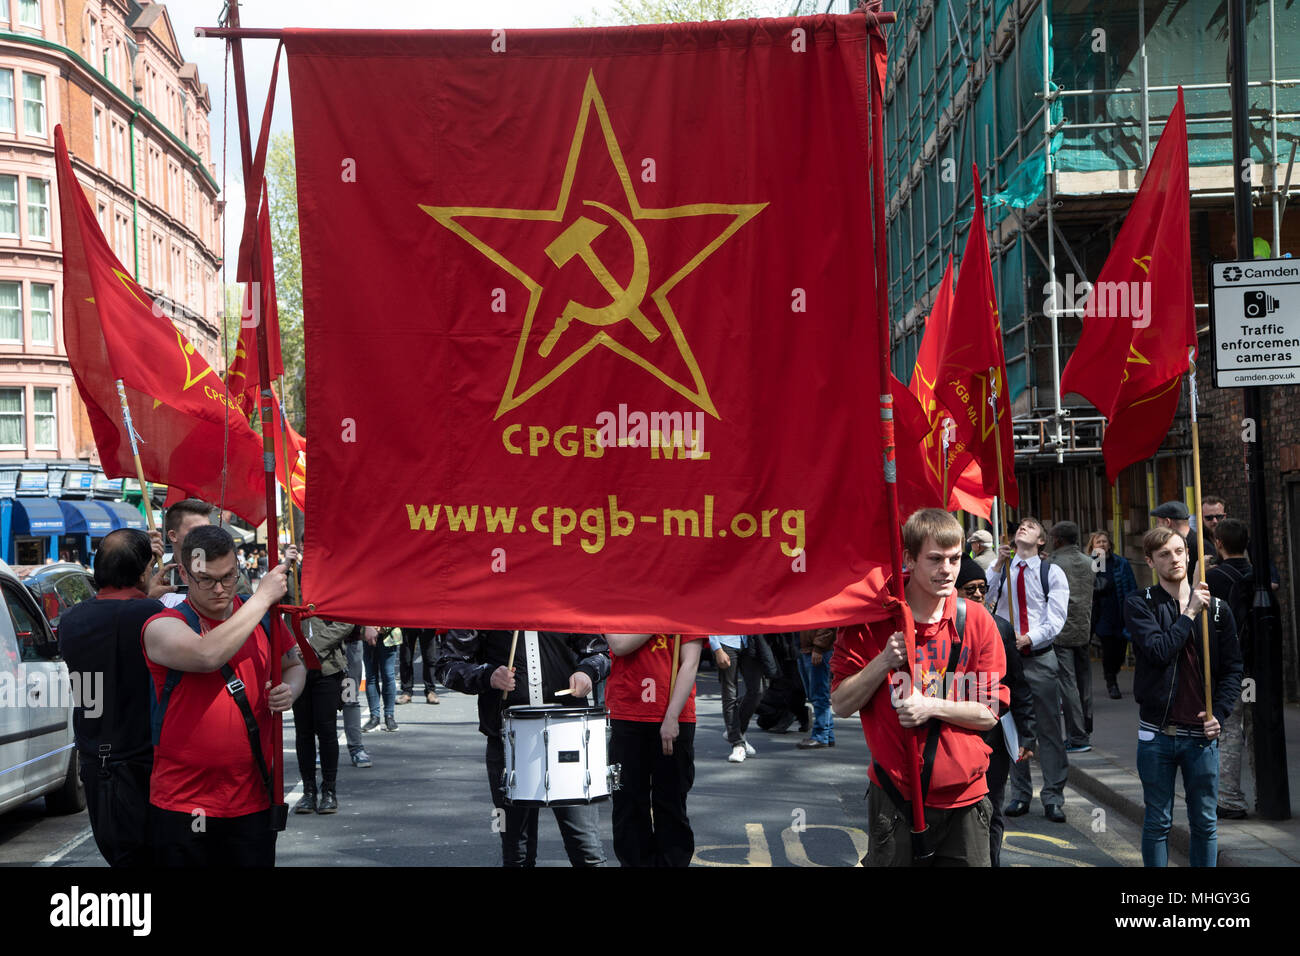 London, UK. 1st May, 2018. Communist Party of Great Britain during May Day celebrations in London, England, United Kingdom. Demonstration by unions and other organisations of workers to mark the annual May Day or Labour Day. Groups from all nationalities from around the World, living in London gathered to march to a rally in central London to mark the global workers day. Credit: Michael Kemp/Alamy Live News Stock Photo